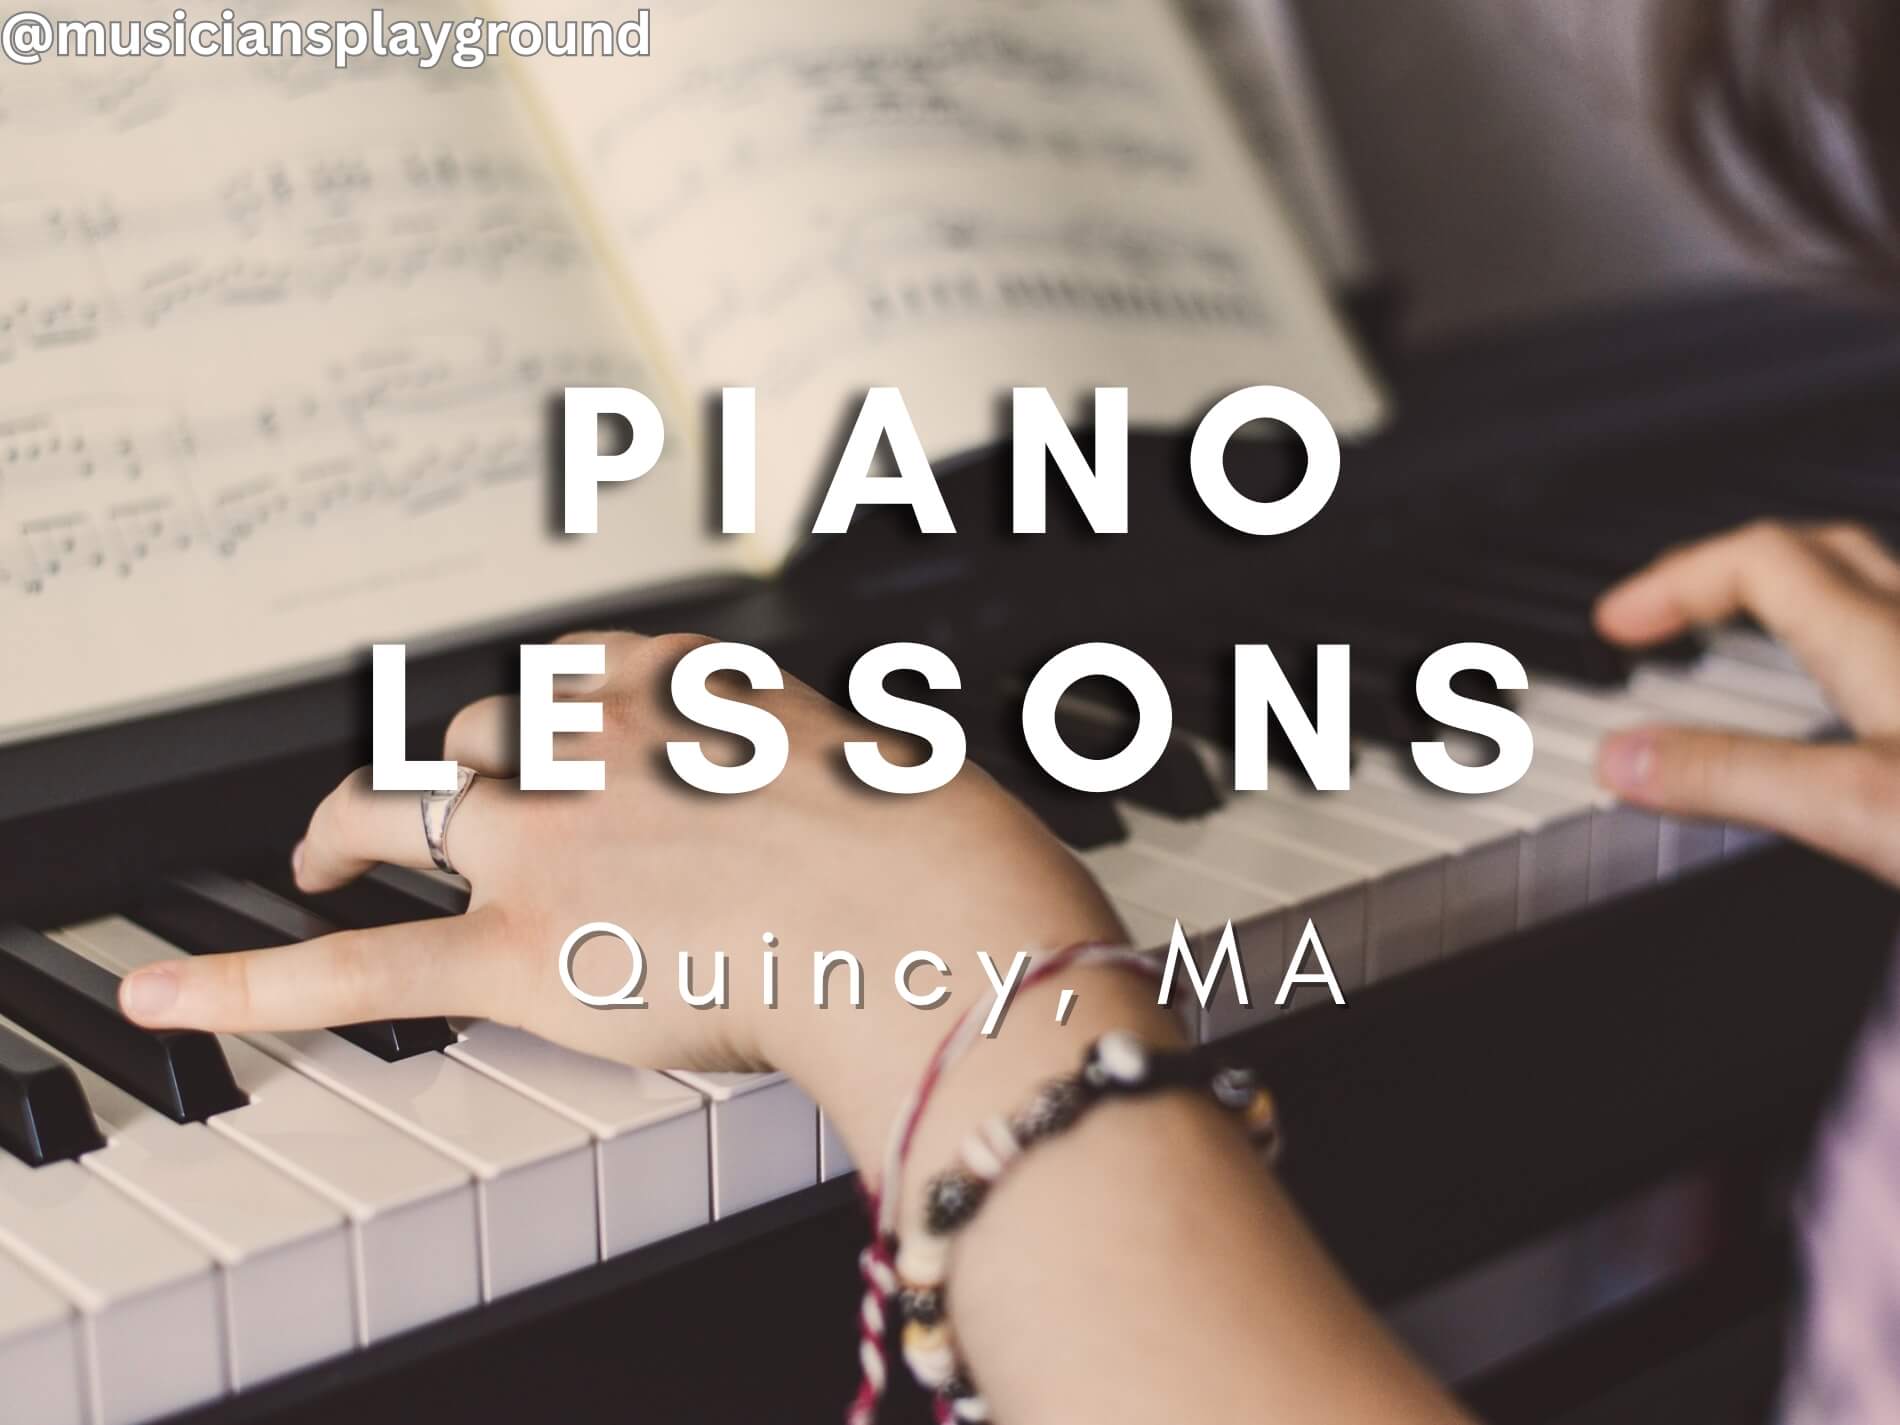 Quincy, Massachusetts: A Haven for Piano Lessons and Music Education